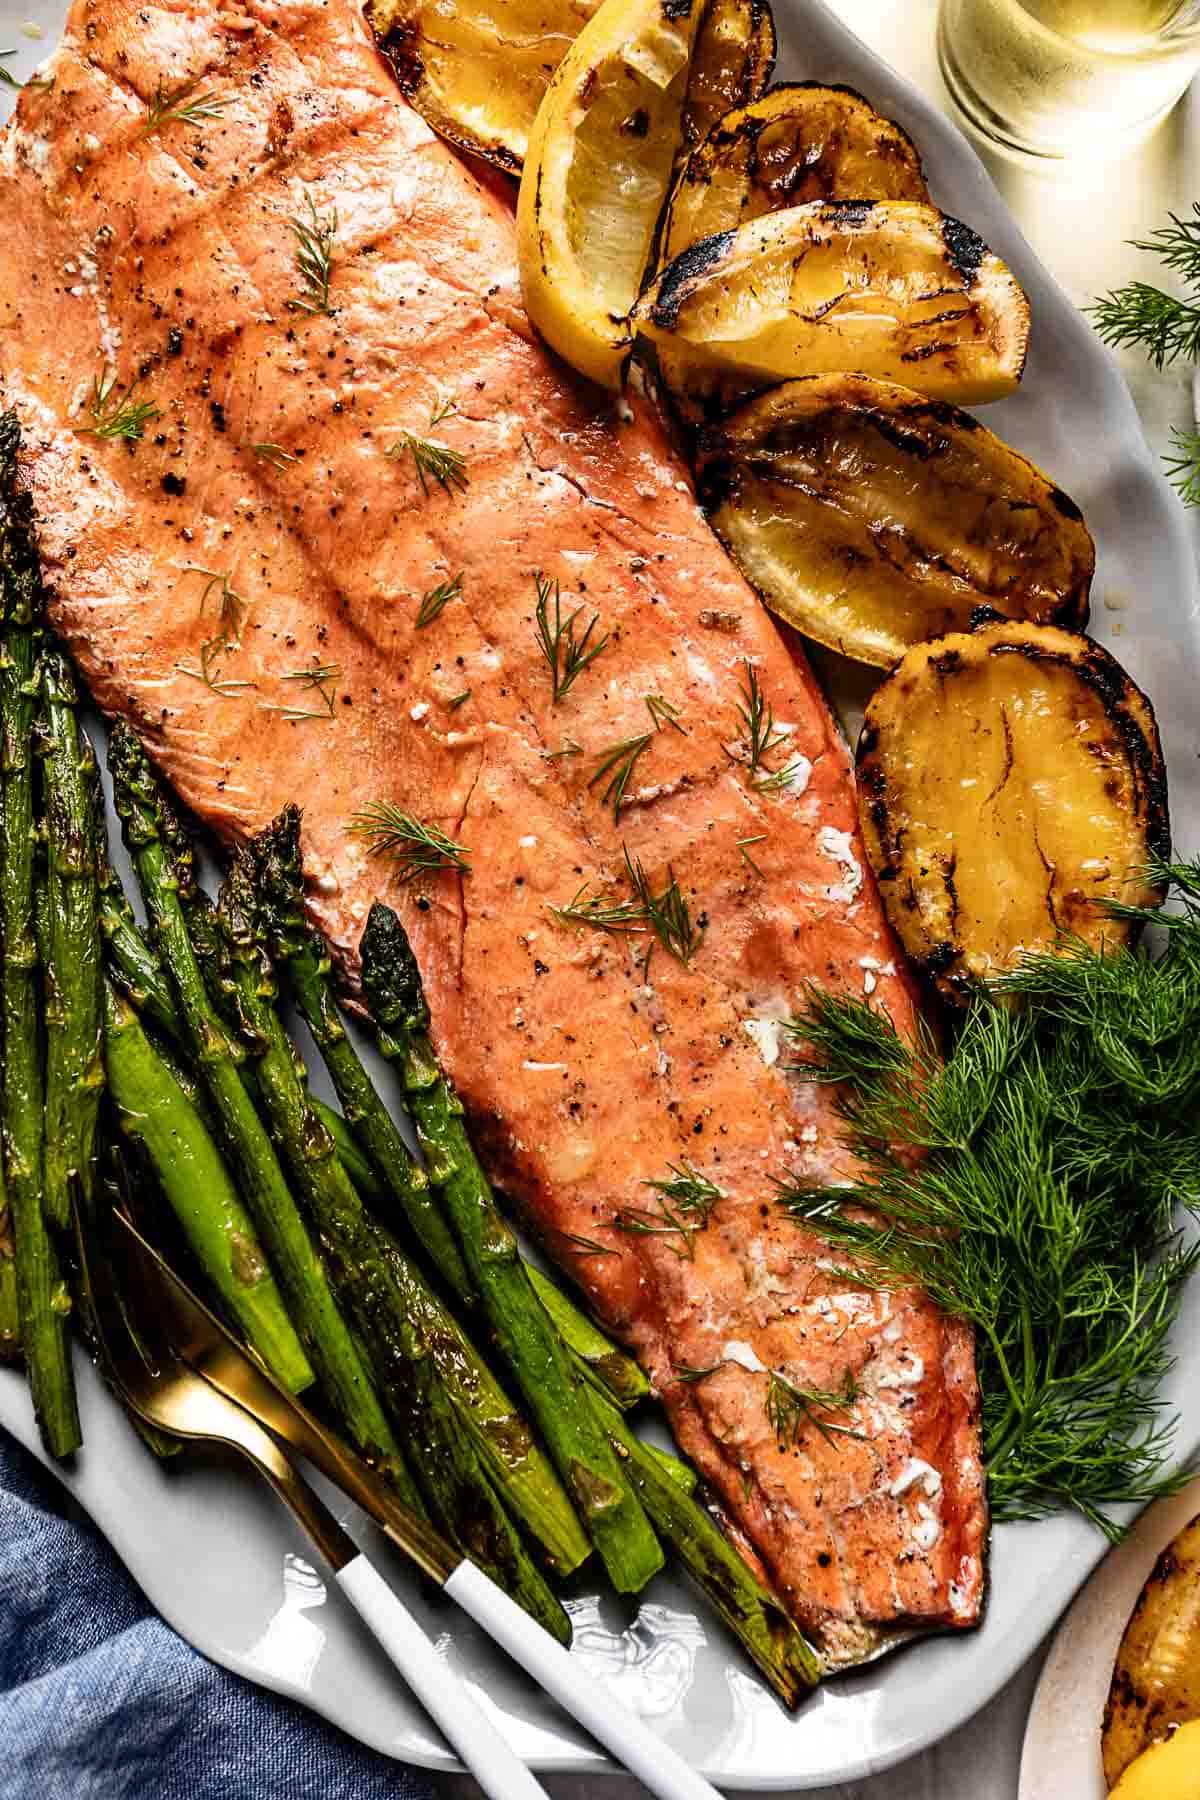 Grilled red salmon with fresh vegetables and herbs on the side.